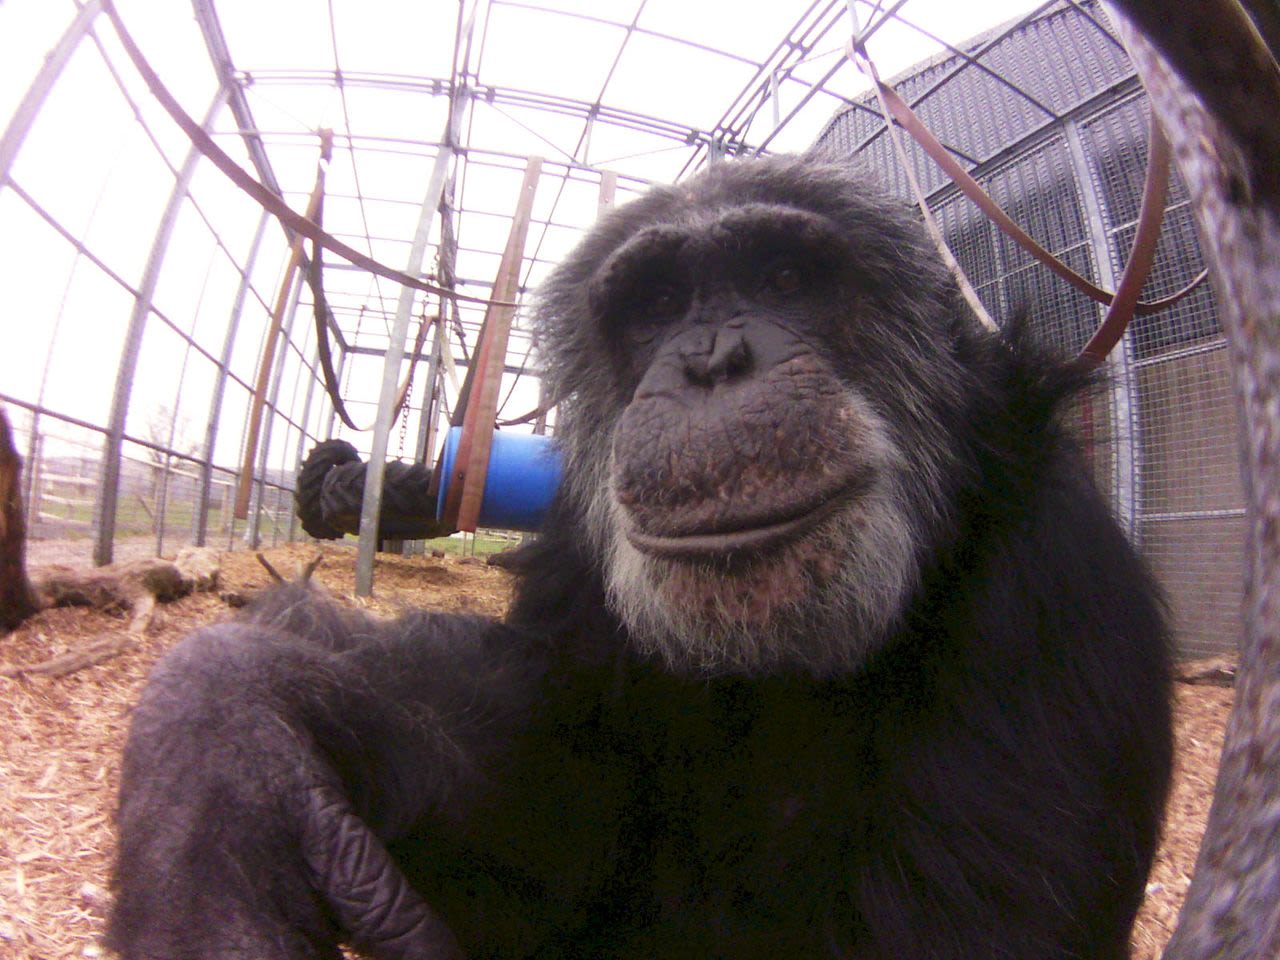 A posing primate as captured with the Little Cyclops camera. Dash raised the money for producing the camera through crowd-funding website <a href="http://www.indiegogo.com/projects/world-s-first-digital-lofi-fisheye" target="_blank" target="_blank">Indiegogo</a>. Only 1,000 will be made in the first run and sold for a price of $100 each.